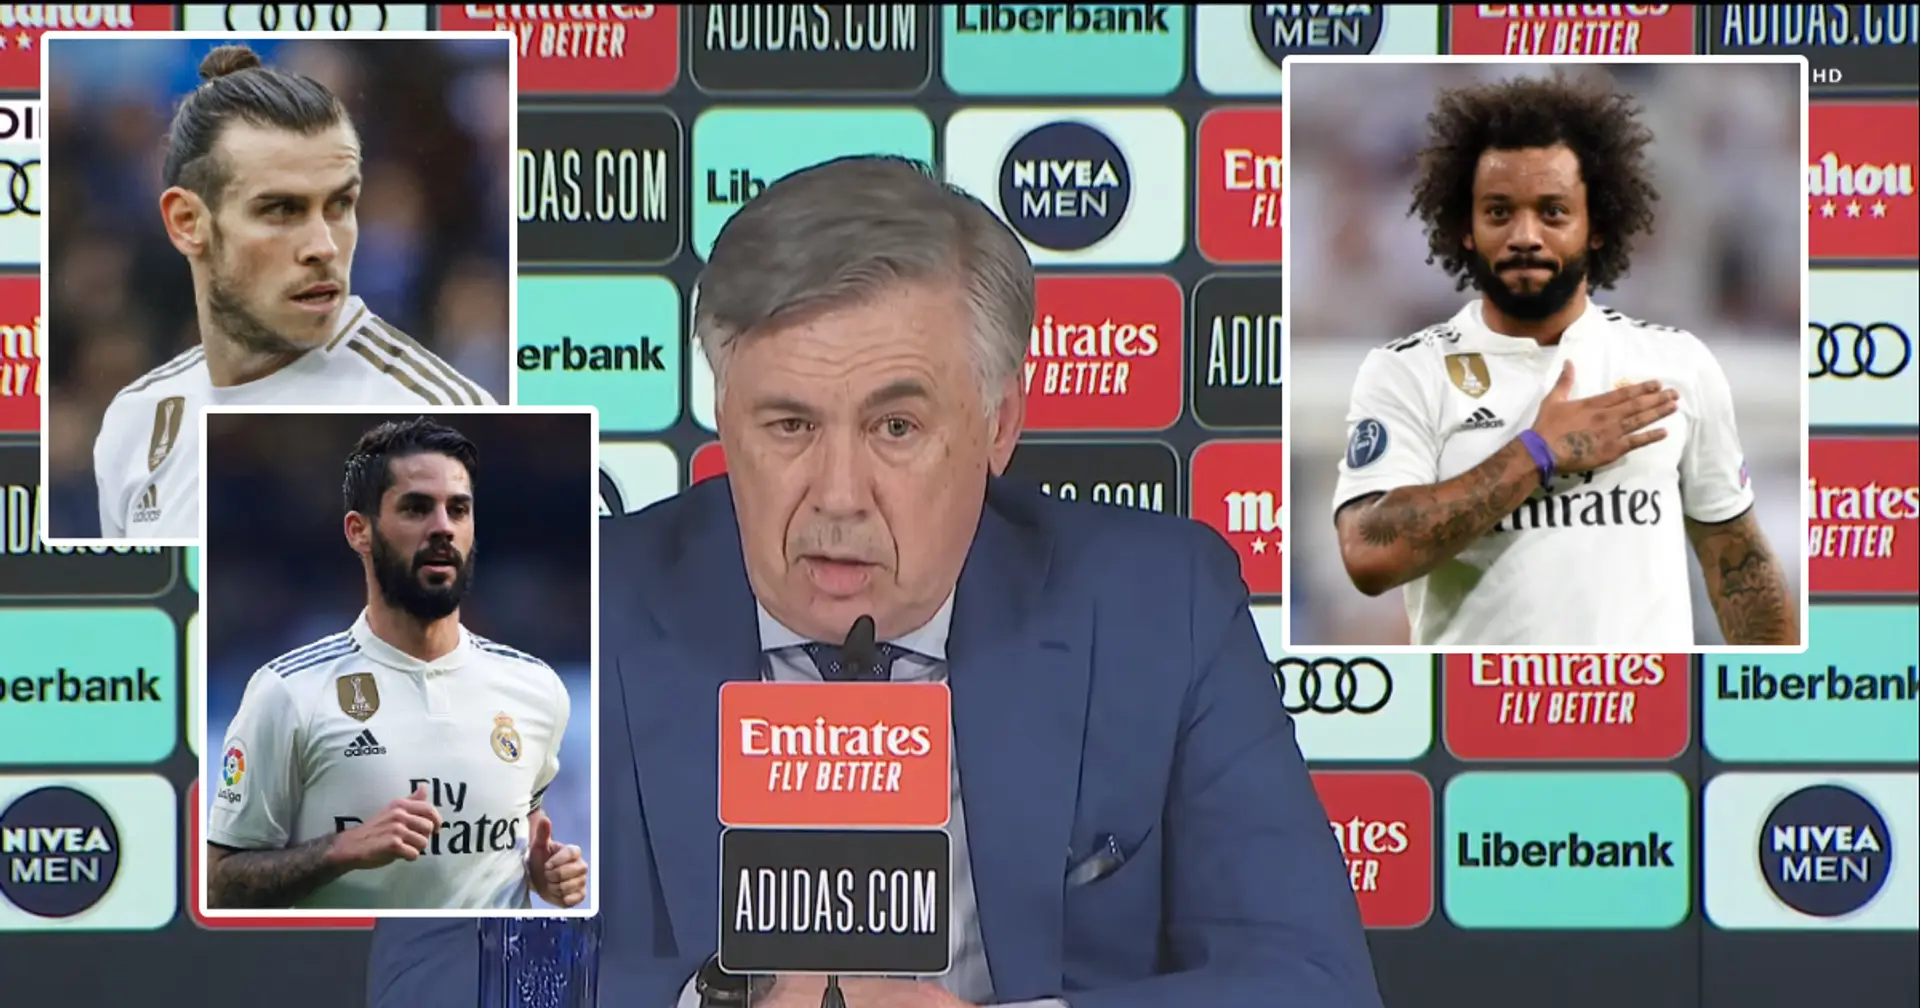 Carlo Ancelotti's reflects on present squad, fringe players, youth and possible transfers